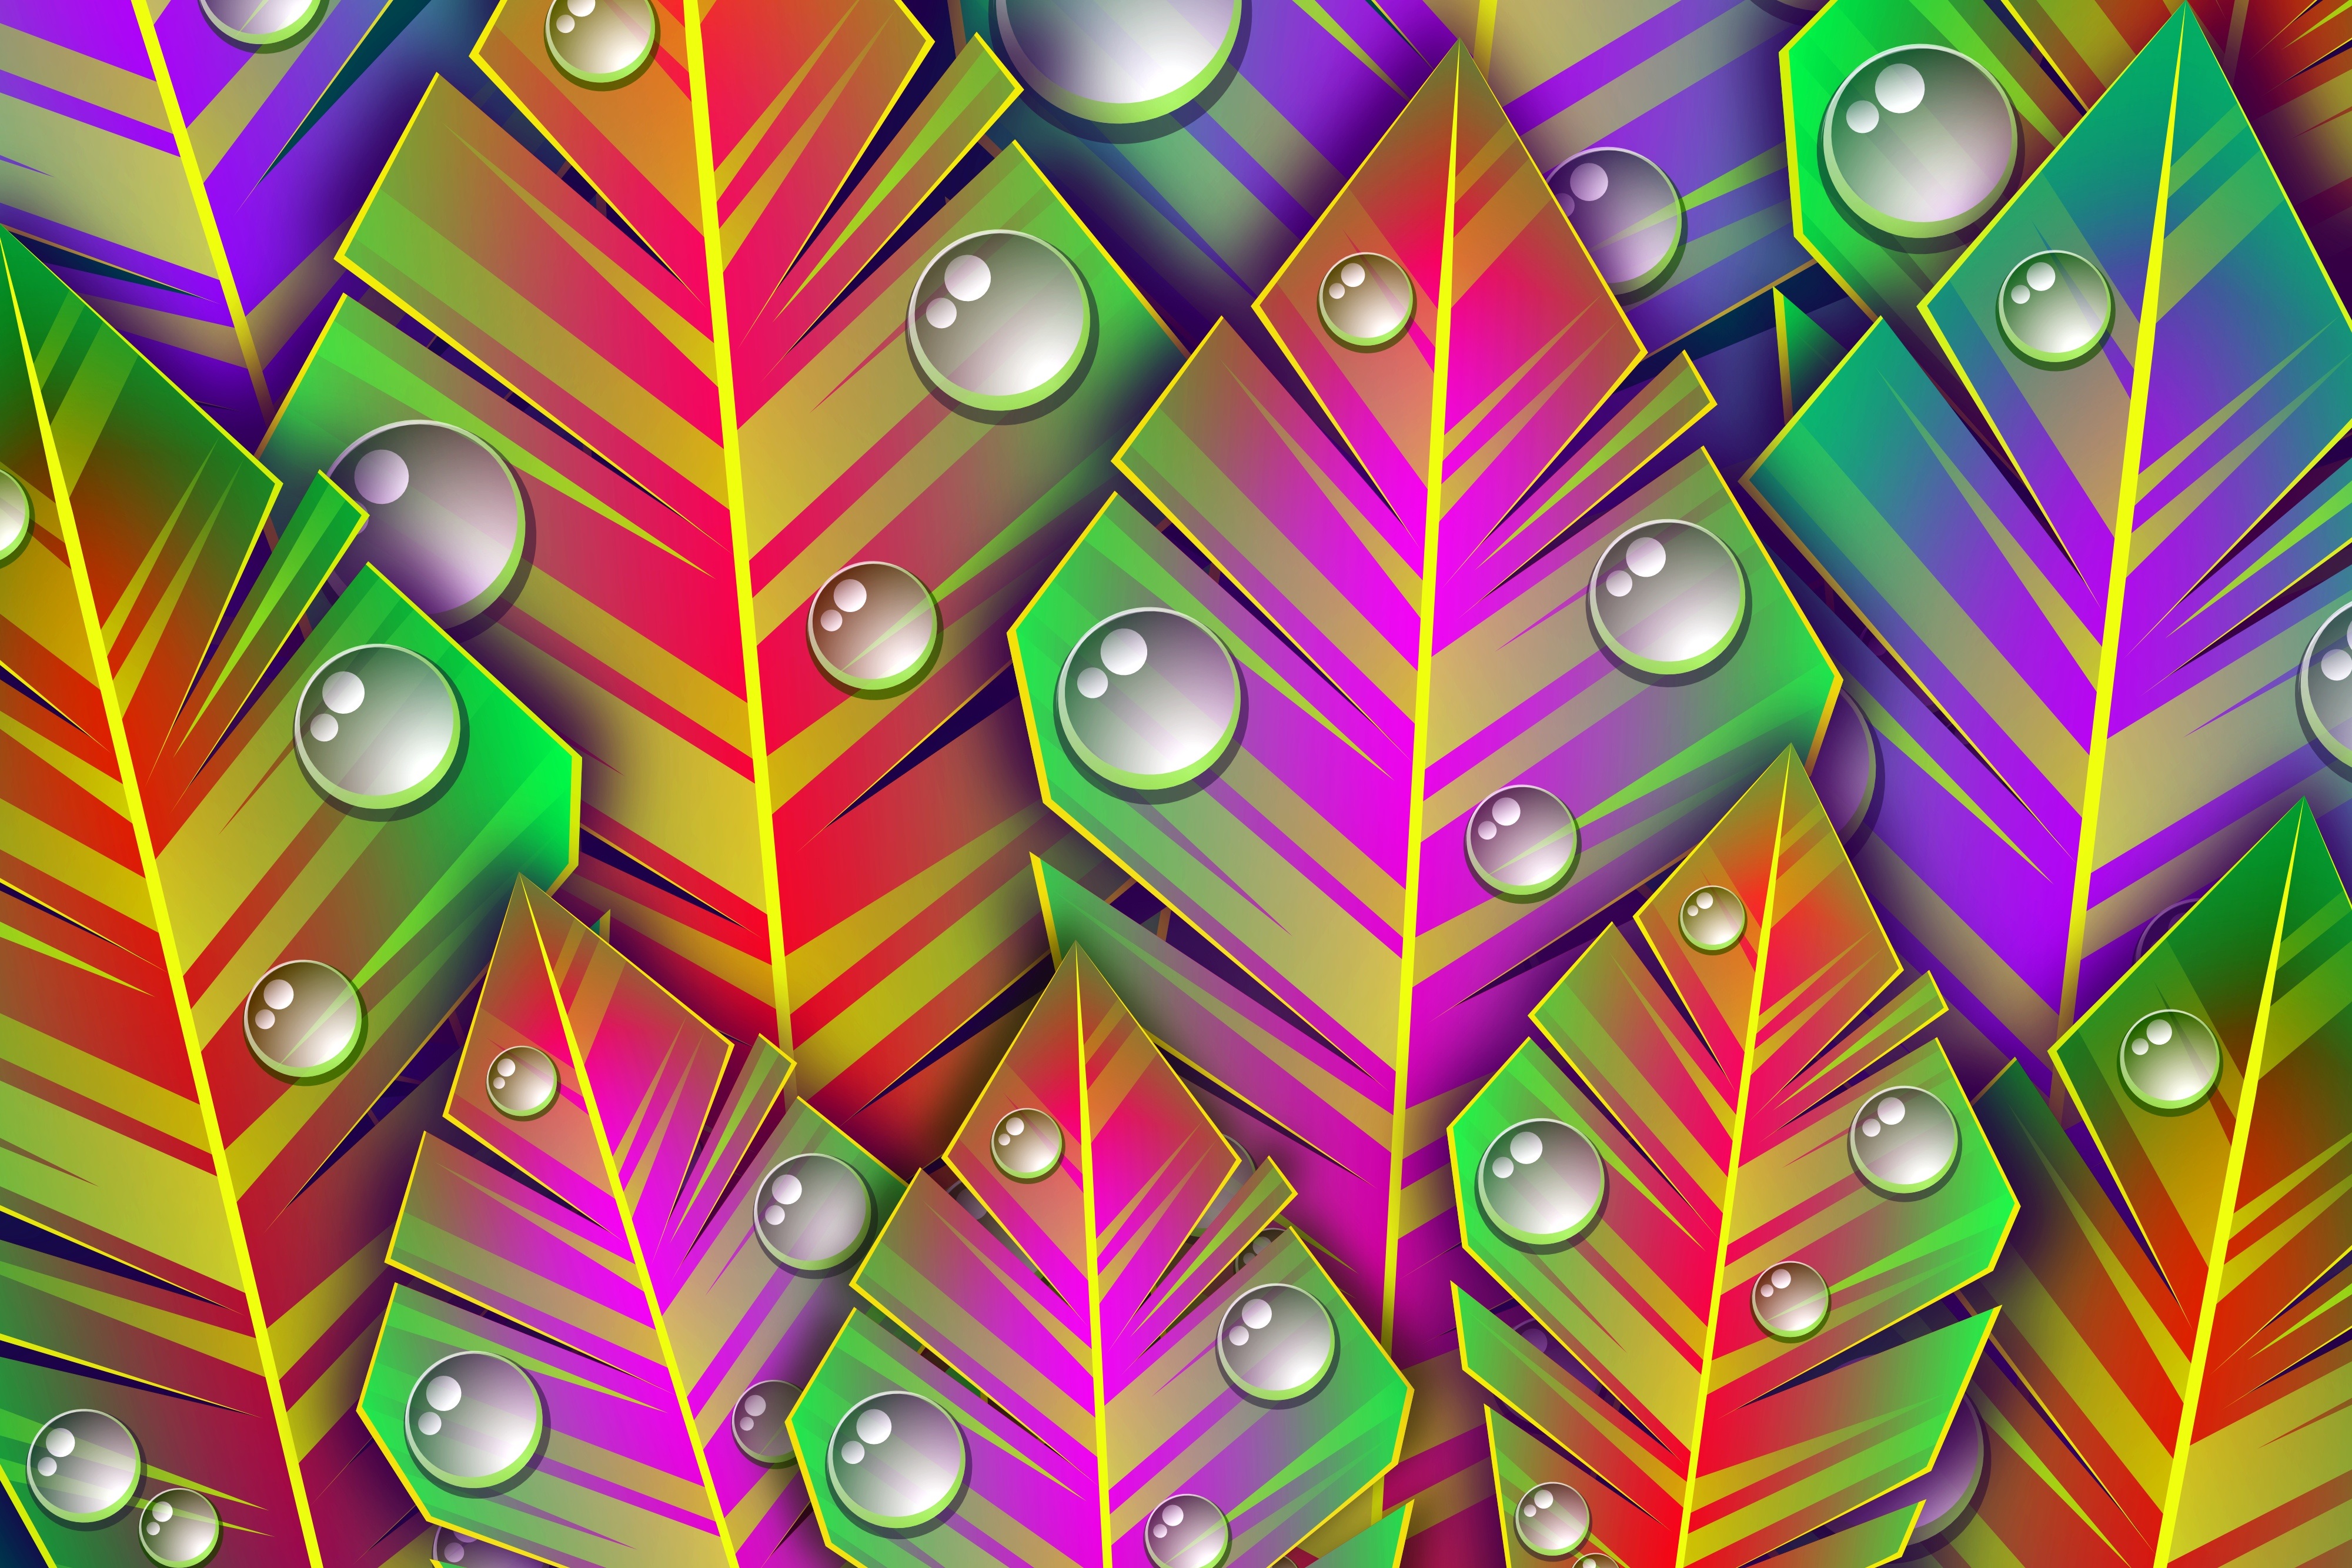 Lock Screen PC Wallpaper patterns, abstract, art, leaves, bright, lines, dew